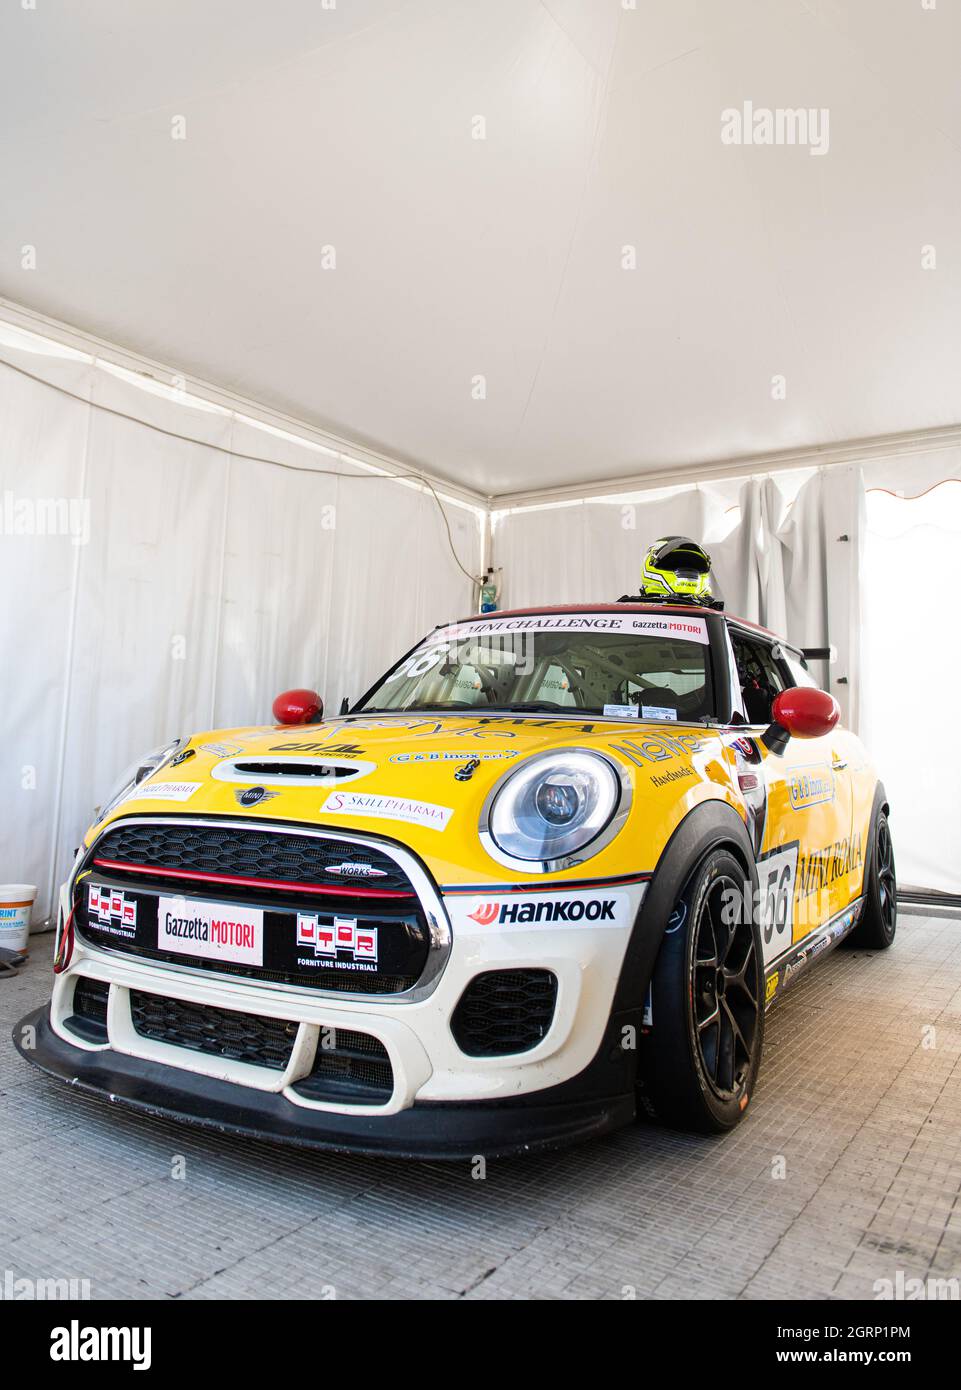 Vallelunga, italy september 18th 2021 Aci racing weekend. Mini Cooper race car competition standing in motorsport showroom no people front view Stock Photo